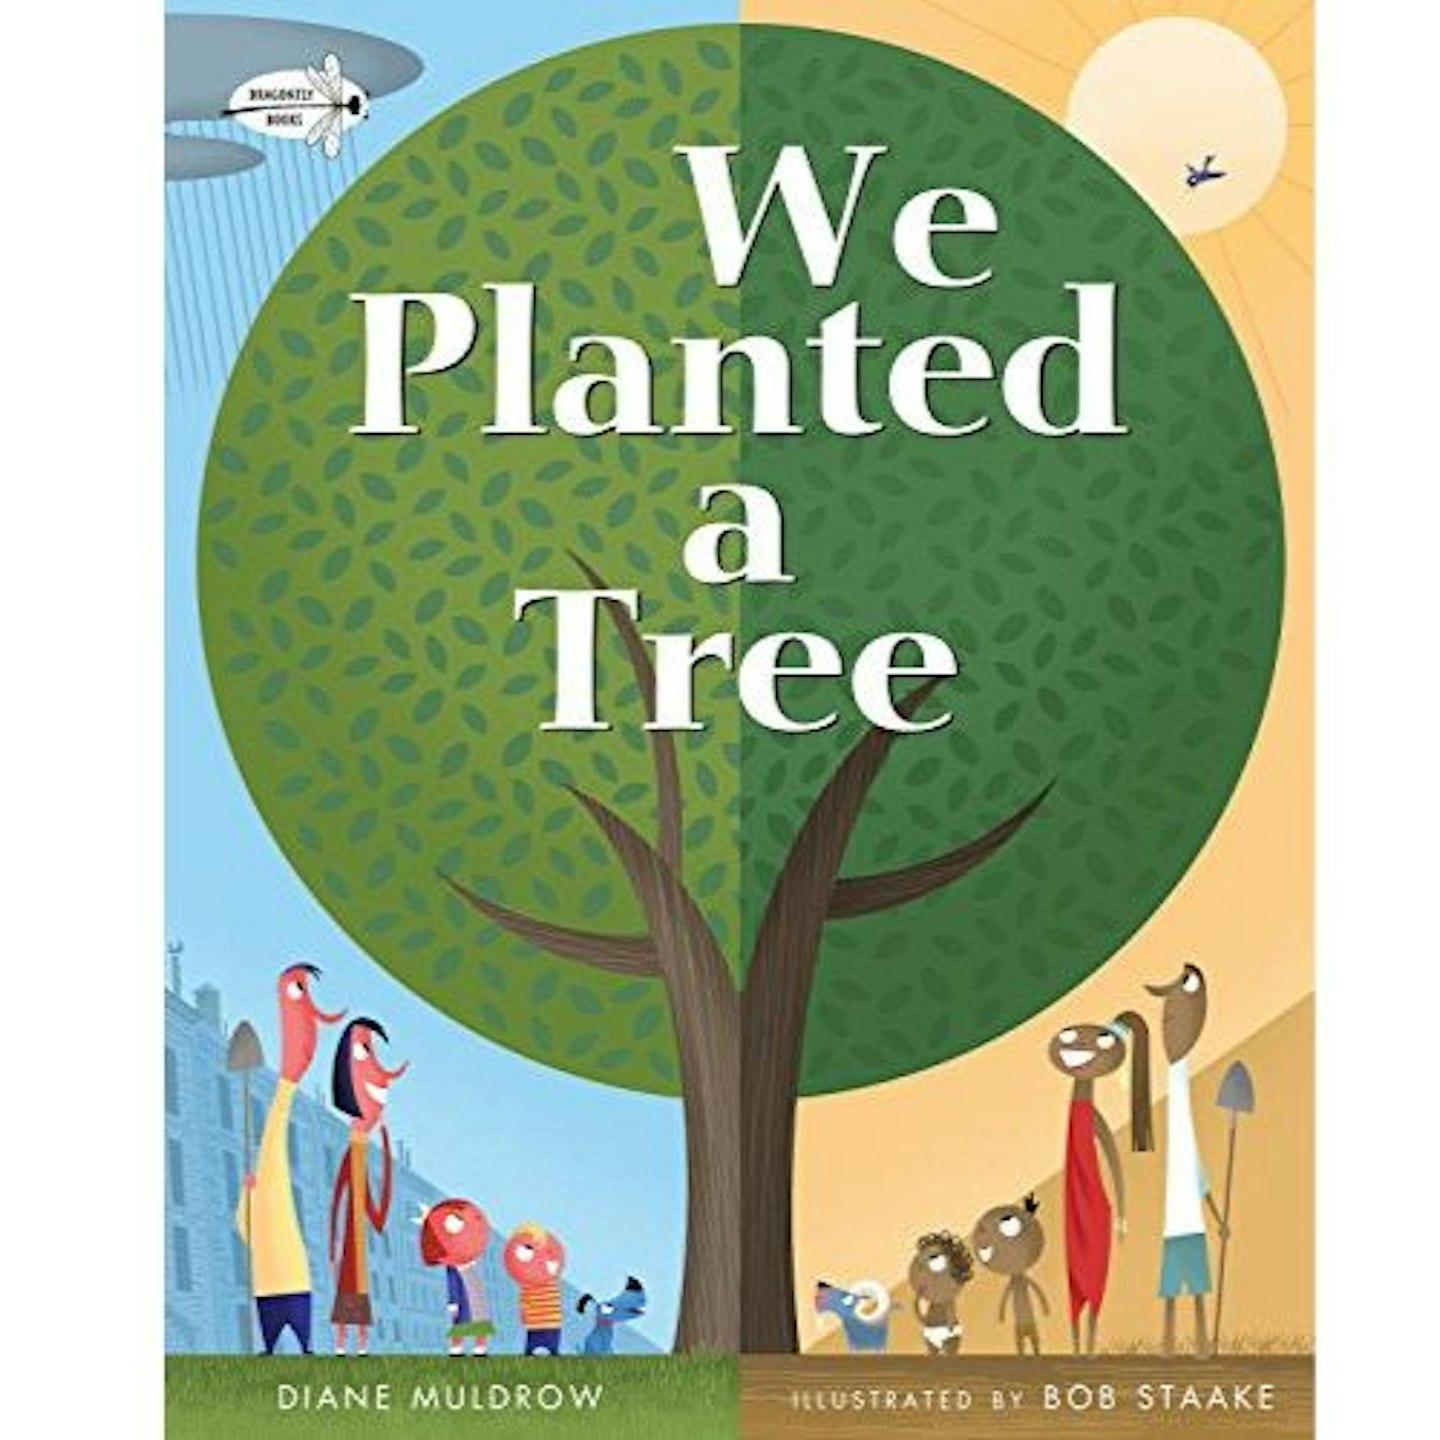 We Planted A Tree by Diane Muldrow